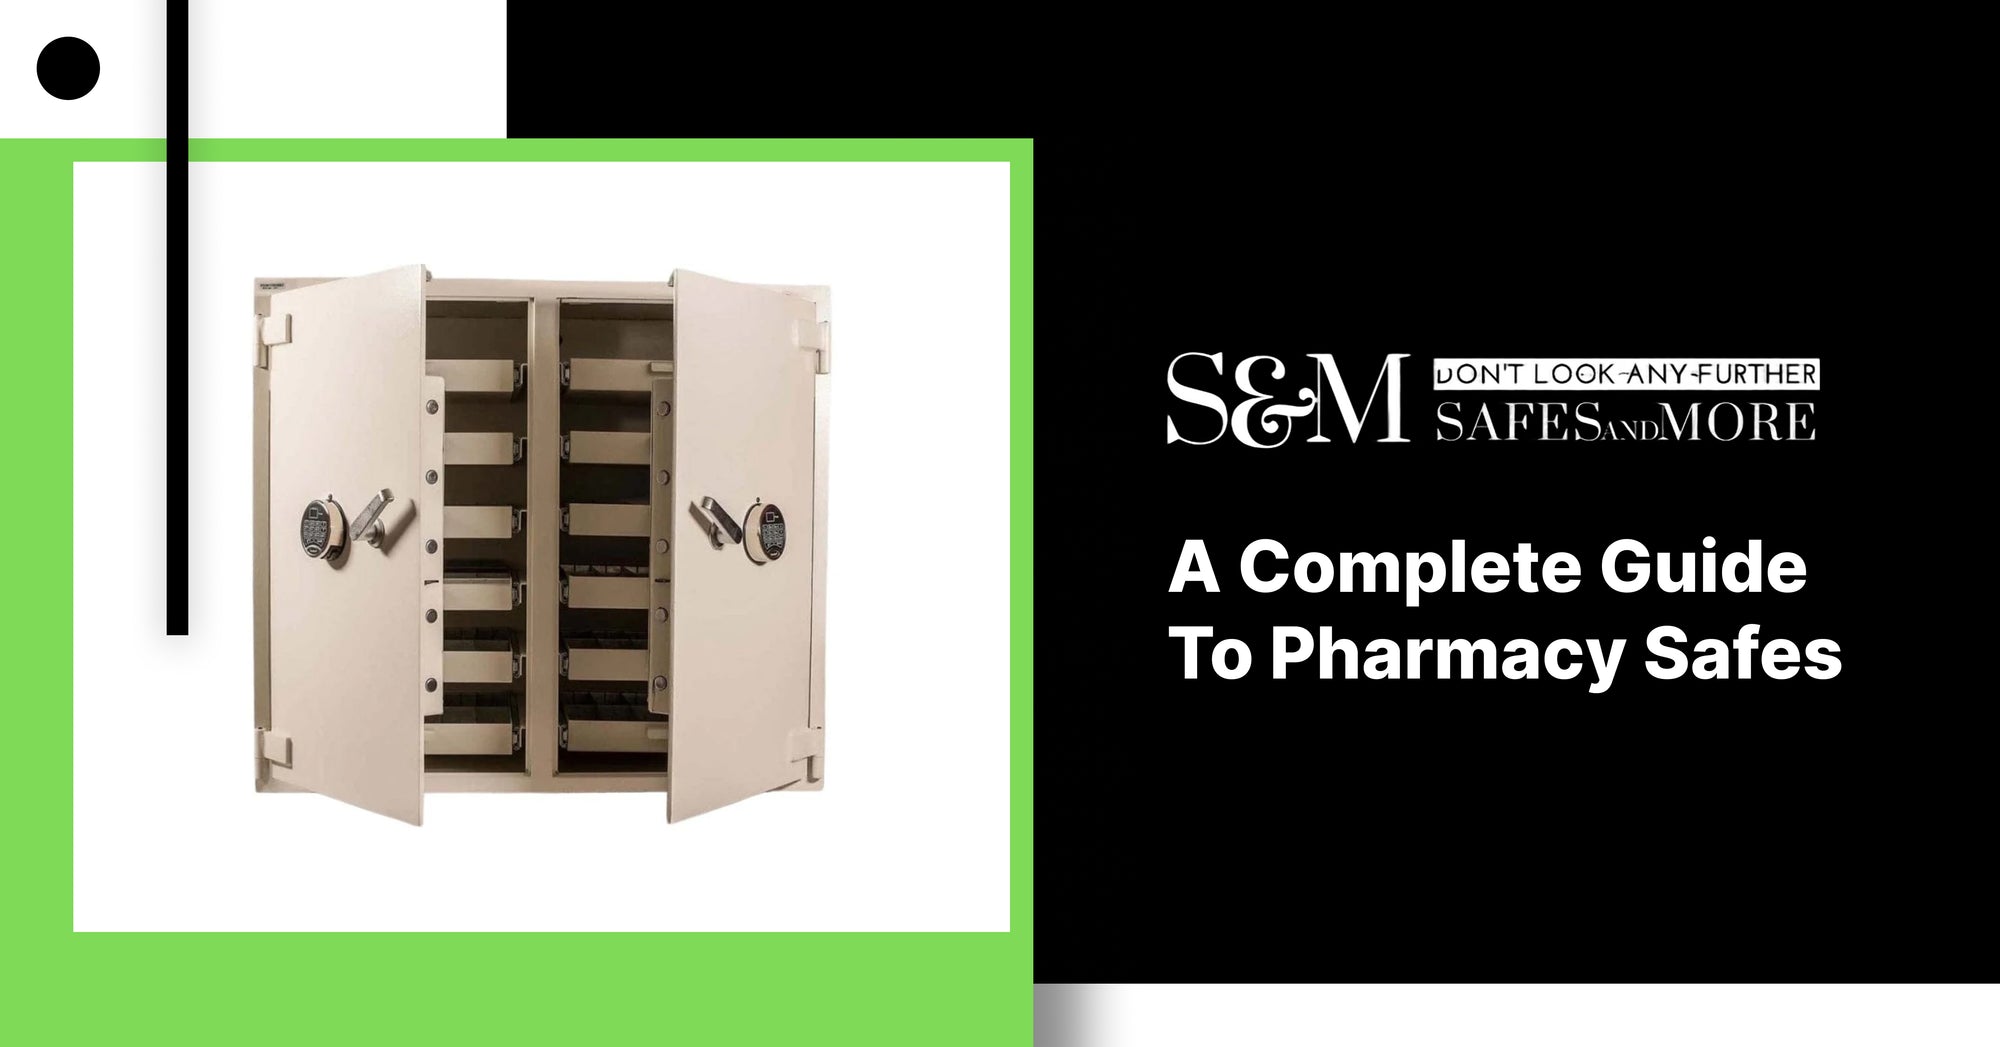 A Complete Guide To Pharmacy Safes